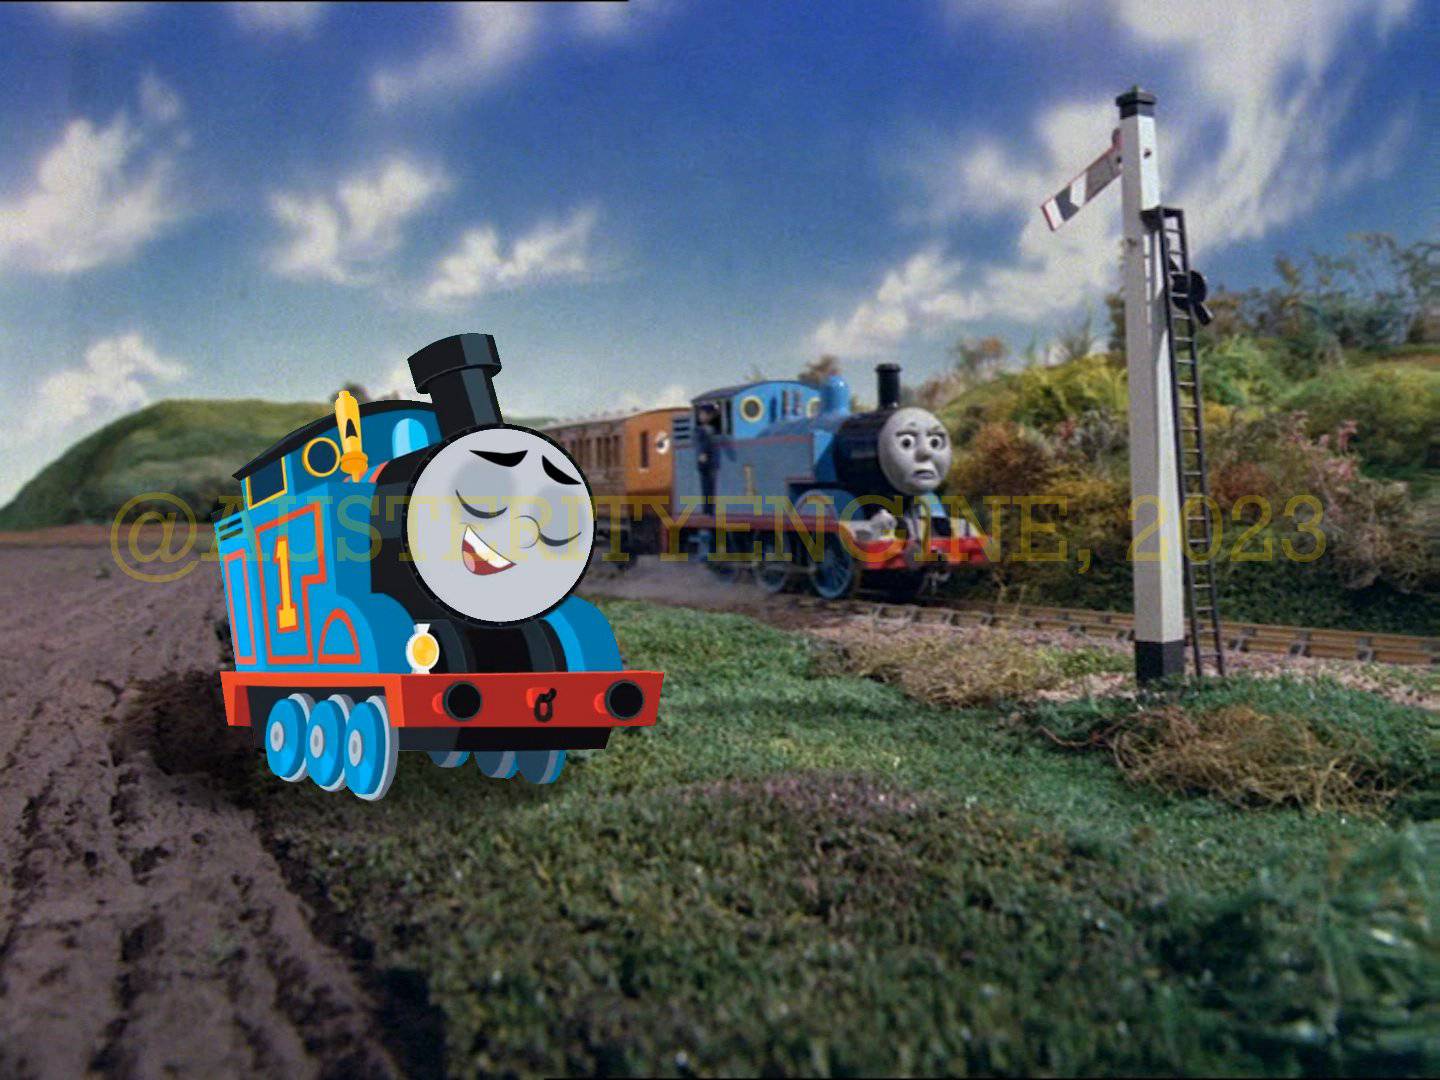 Classic Thomas meets All Engines Go Thomas by JackDanaher2001 on DeviantArt